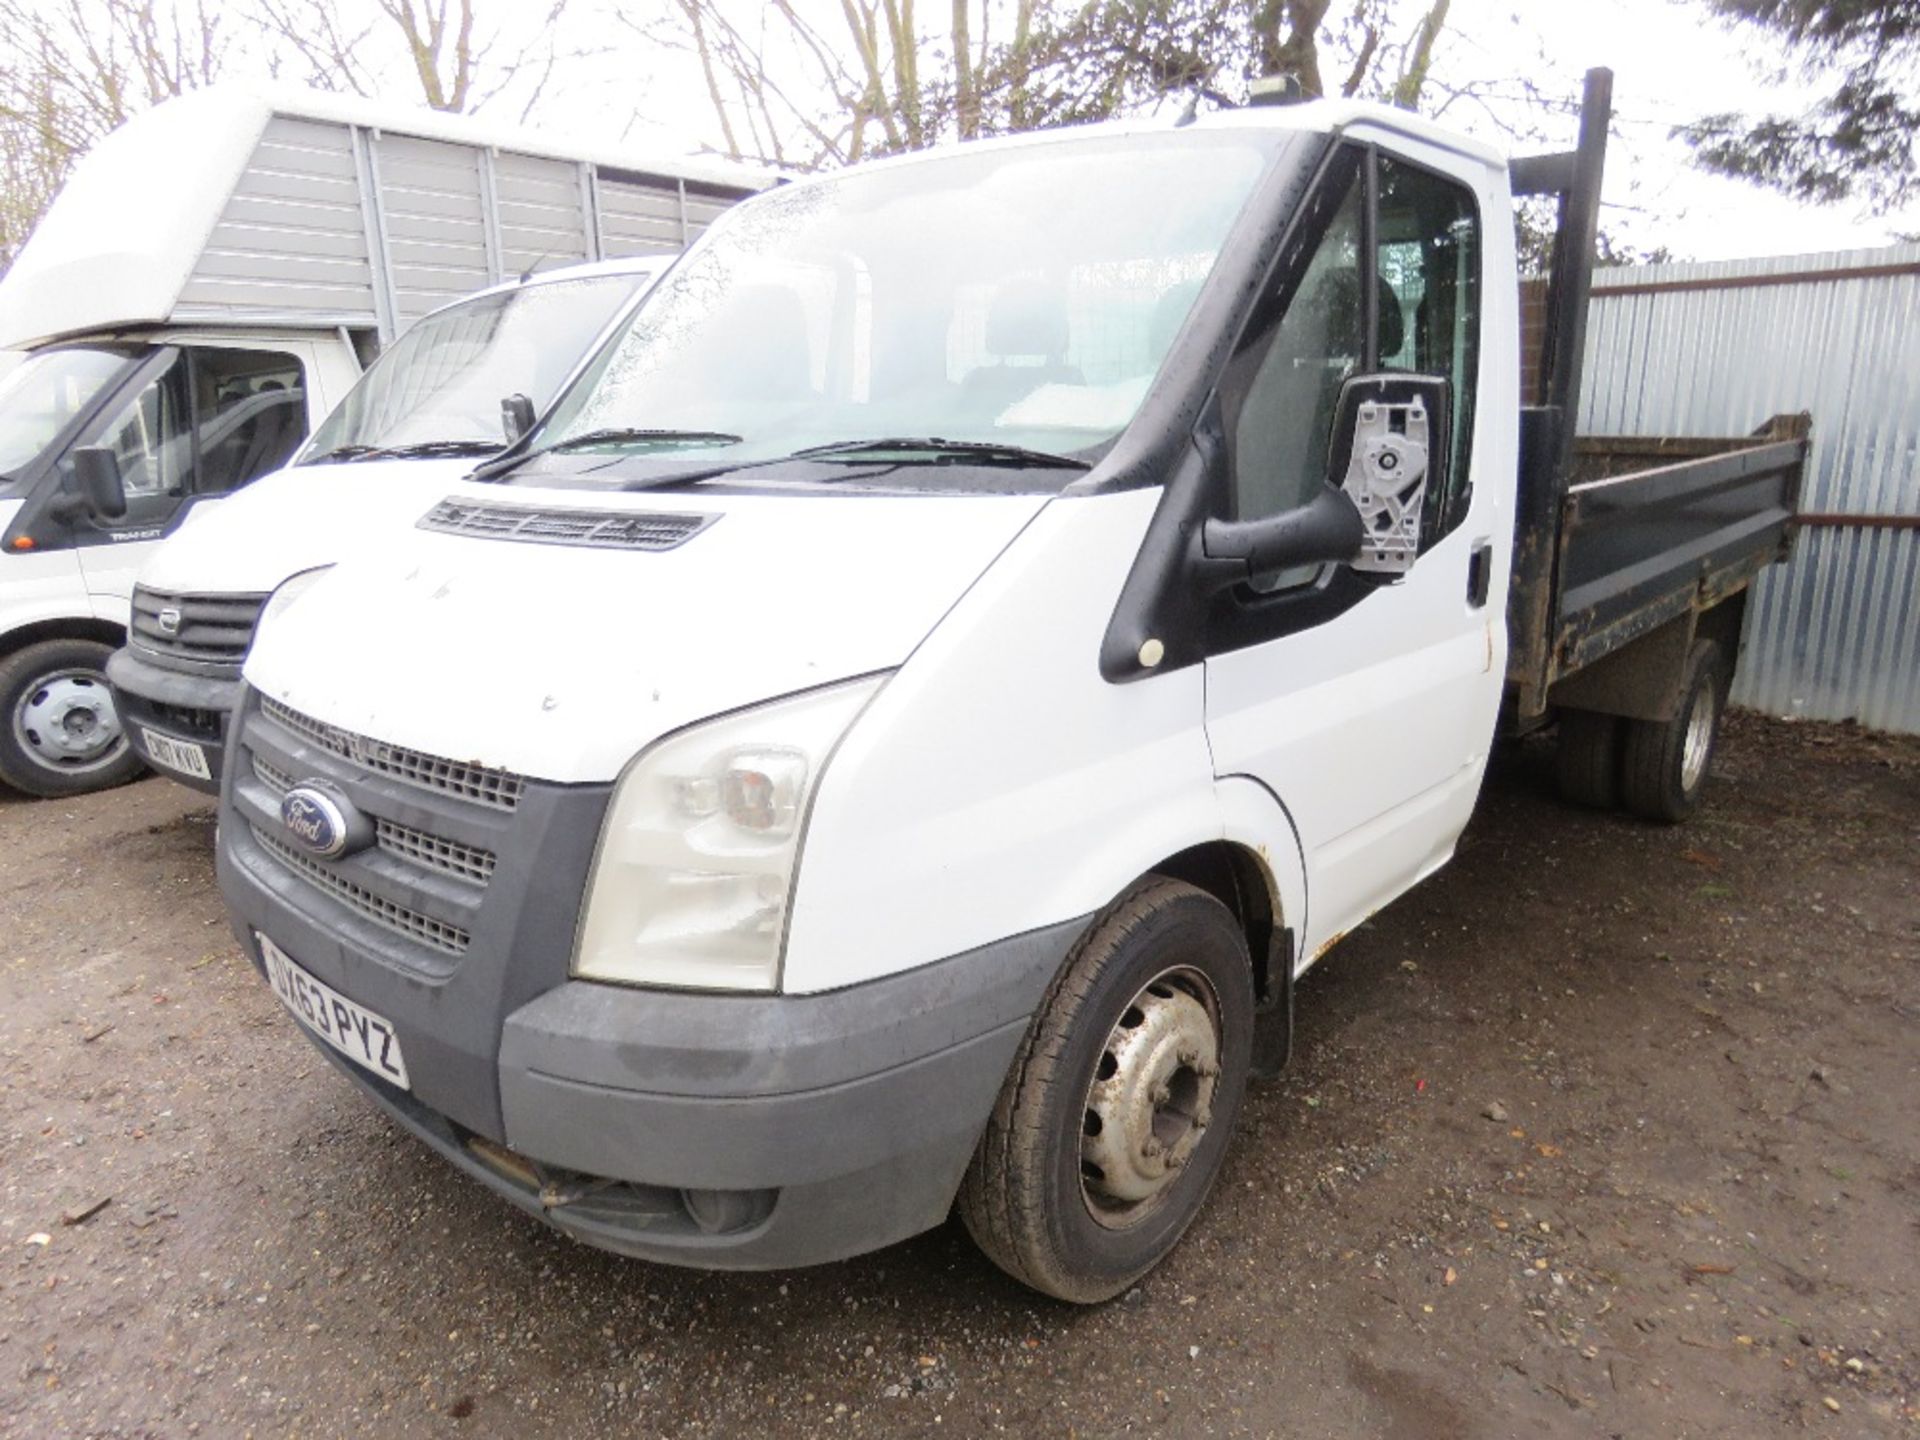 FORD TRANSIT TIPPER TRUCK REG:DX63 PYZ. WITH V5. MOT UNTIL 19/05/24. SOURCED FROM COMPANY LIQUIDATIO - Image 3 of 9